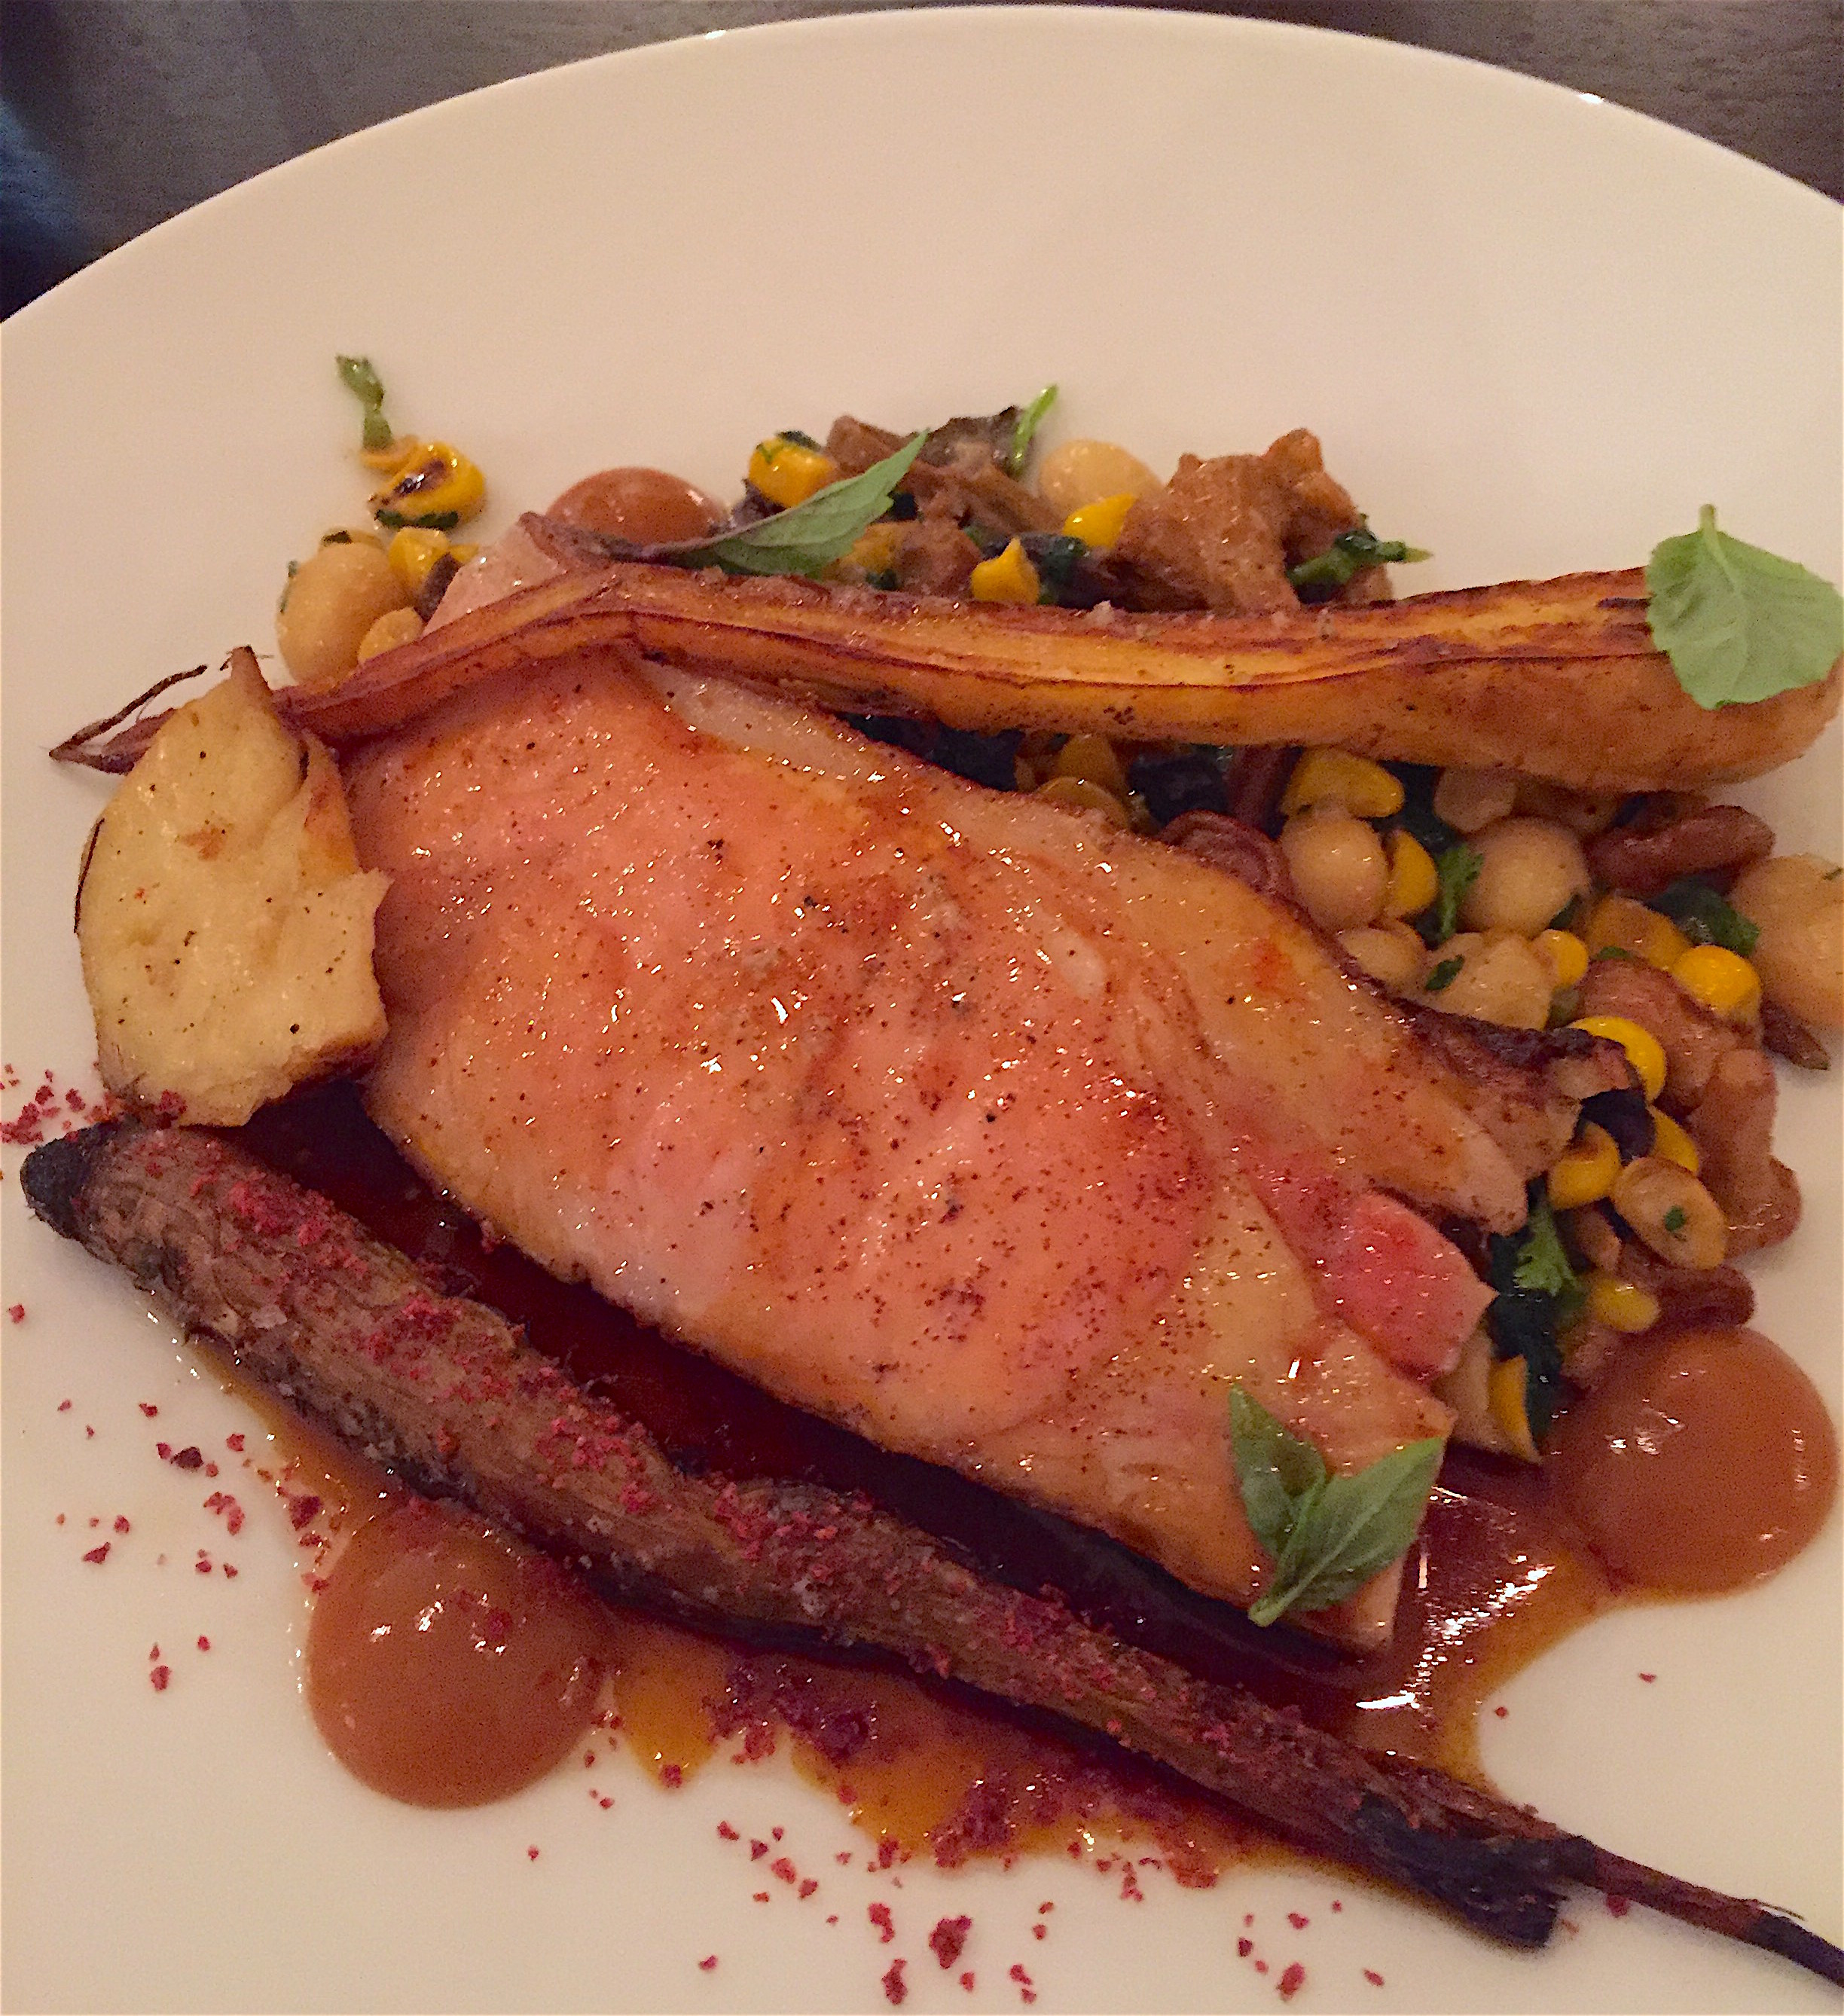 Eels - Iberian pork with salsify and roasted corn, white beans and girlies @Alexander Lobrano